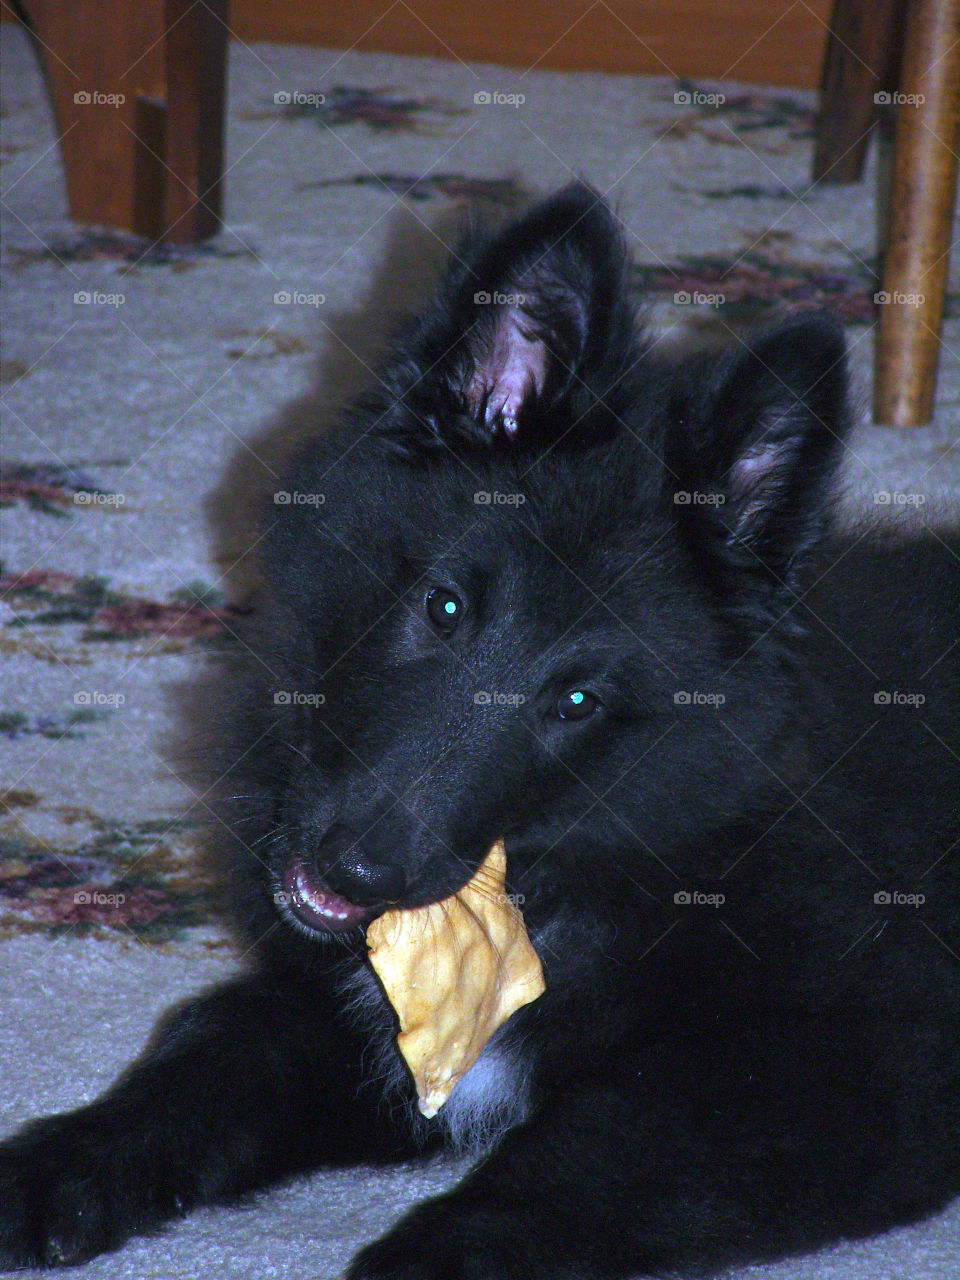 Dog with chip